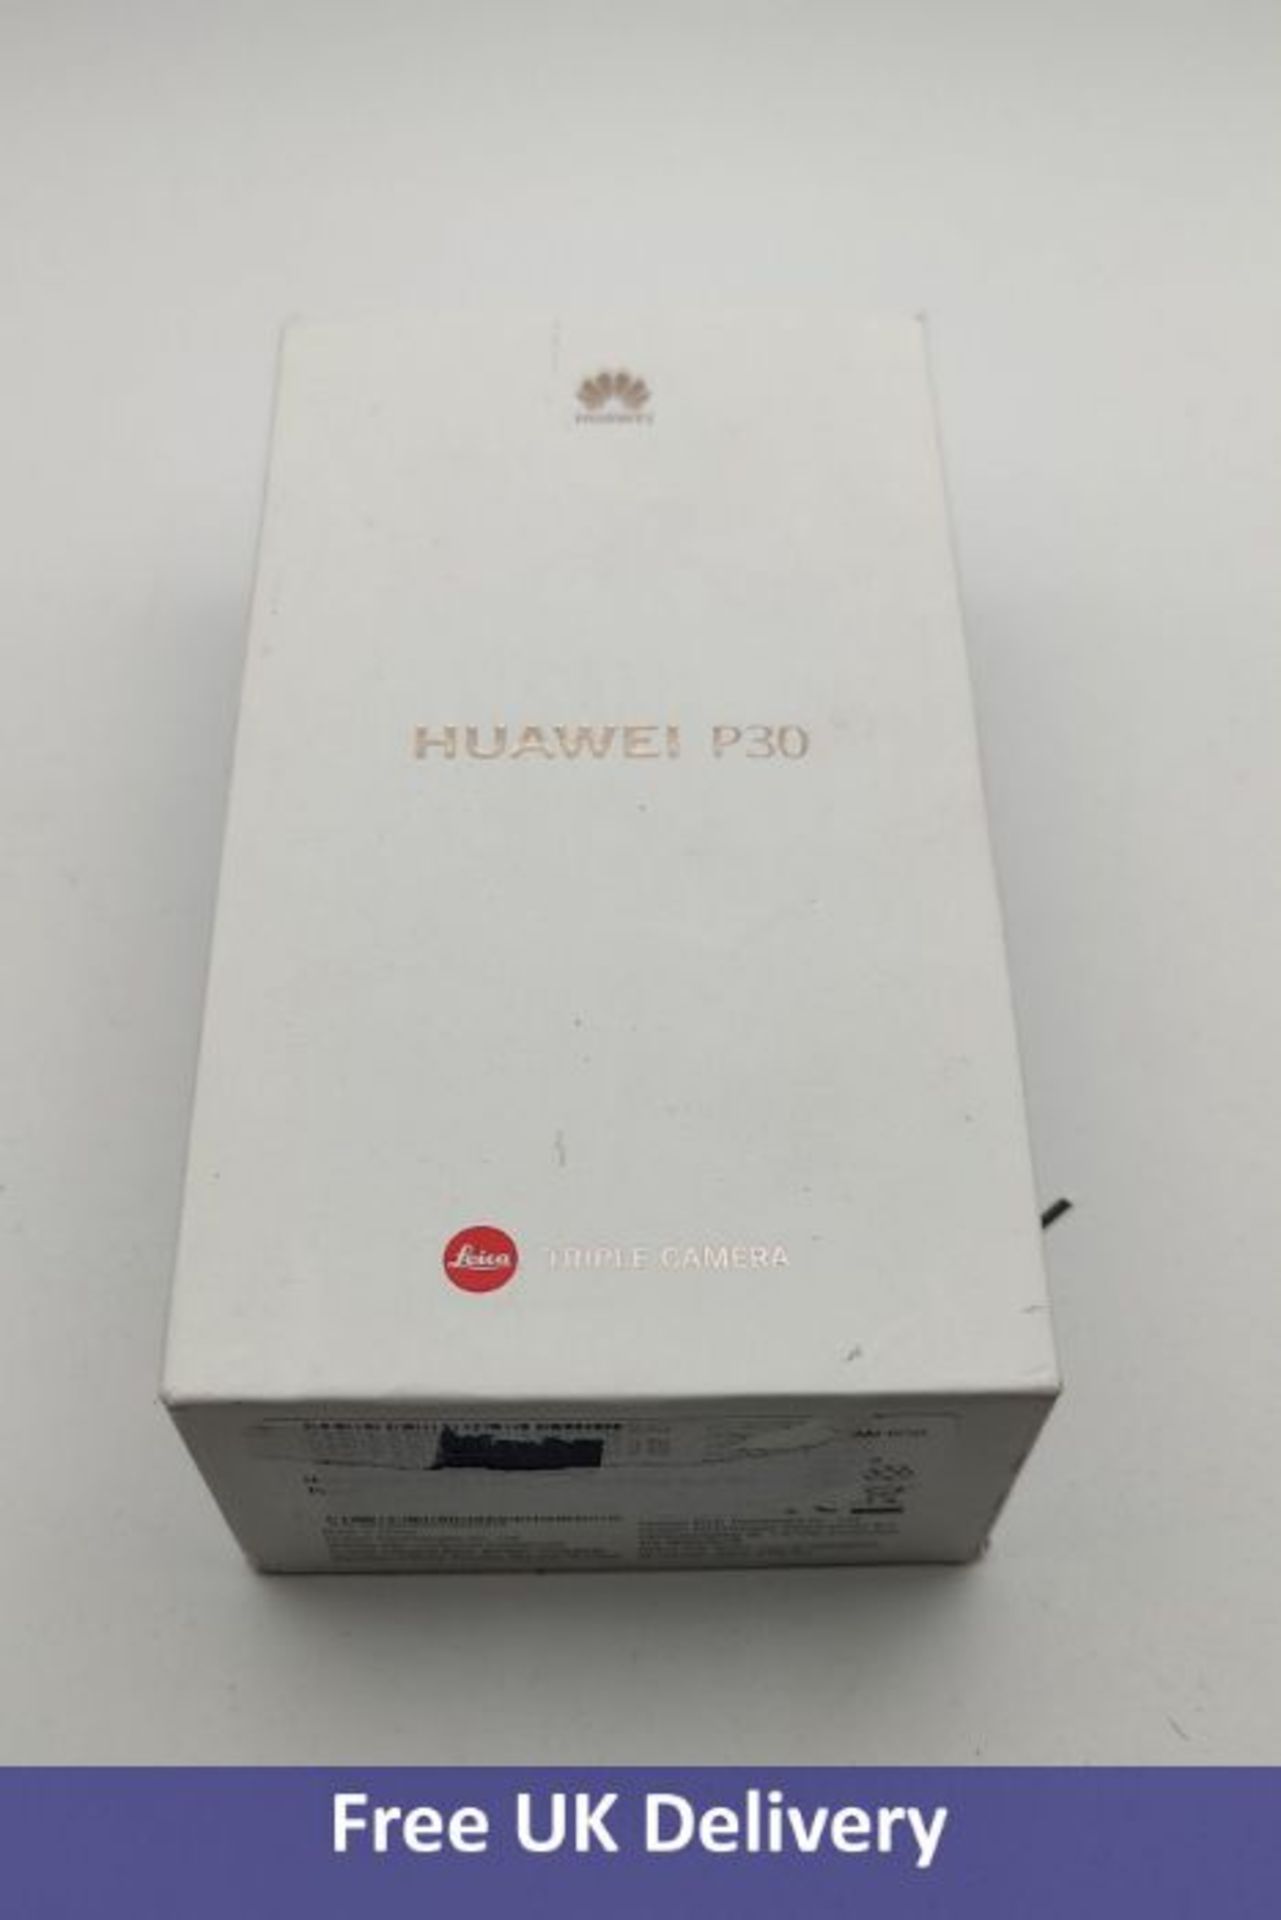 Huawei P30 Android Mobile Phone, 6GB RAM, 128GB Storage, Midnight Black. Brand New, sealed. Requires